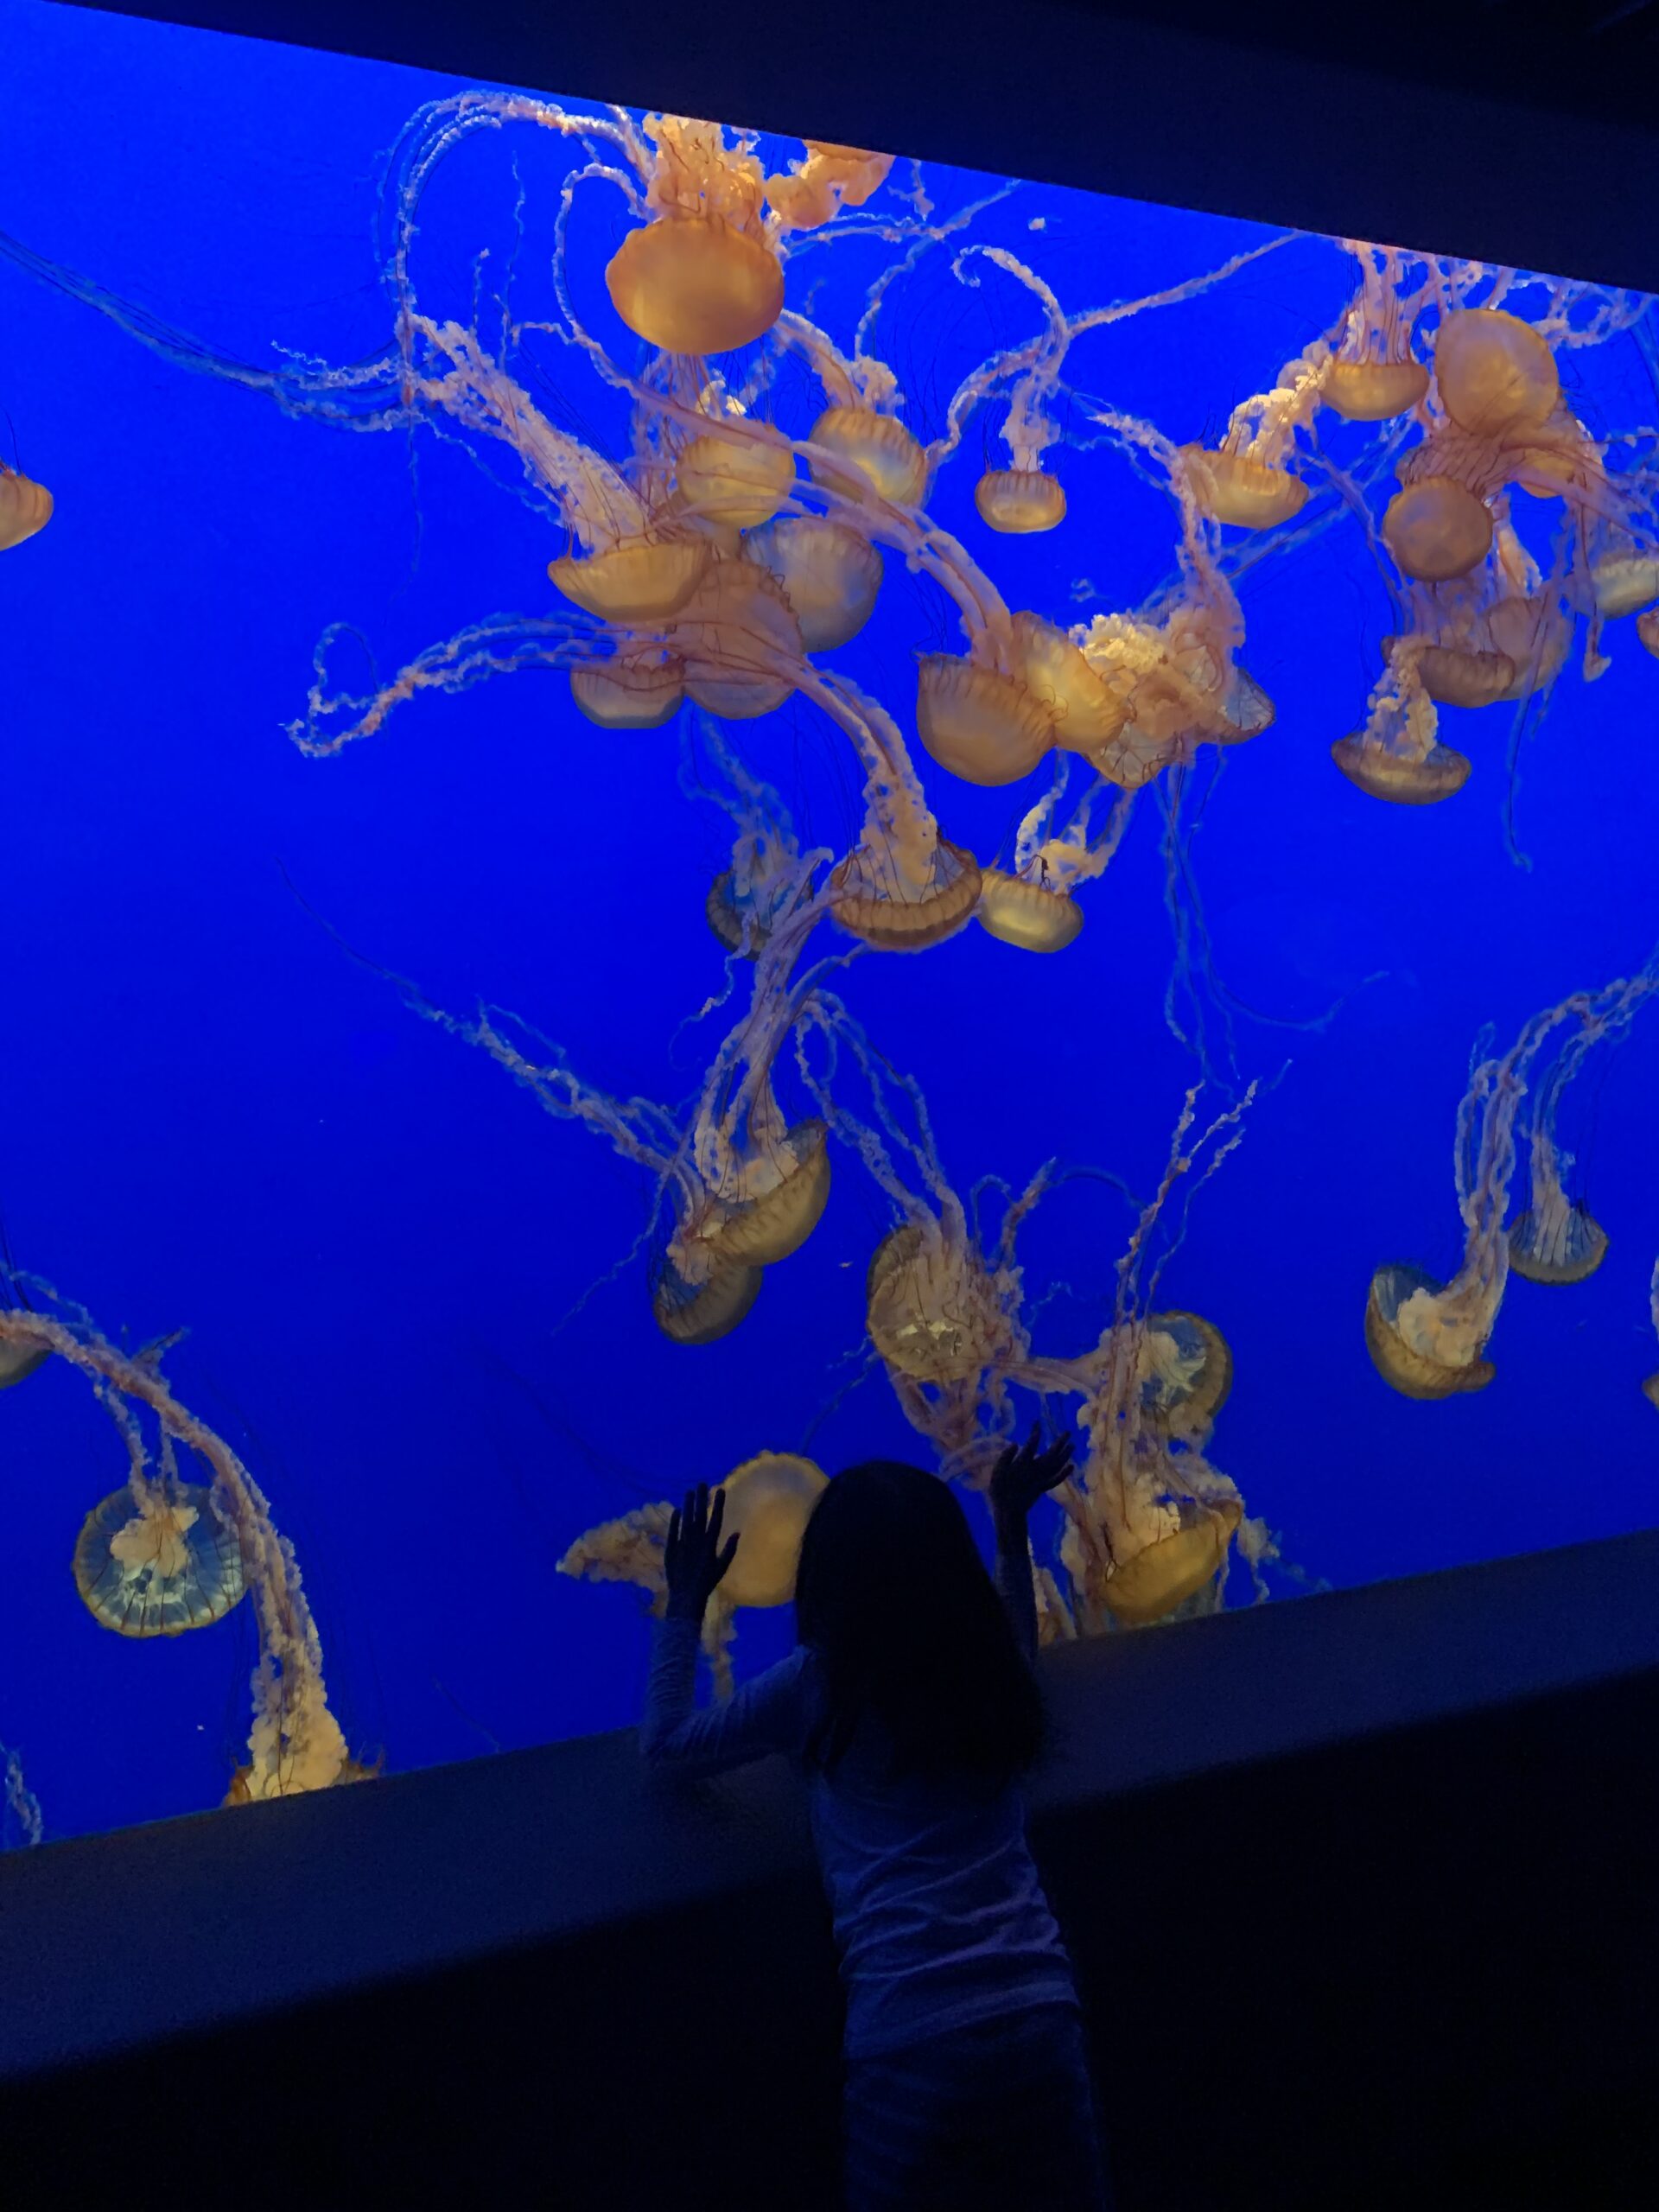 Child looking at jellyfish in a tank